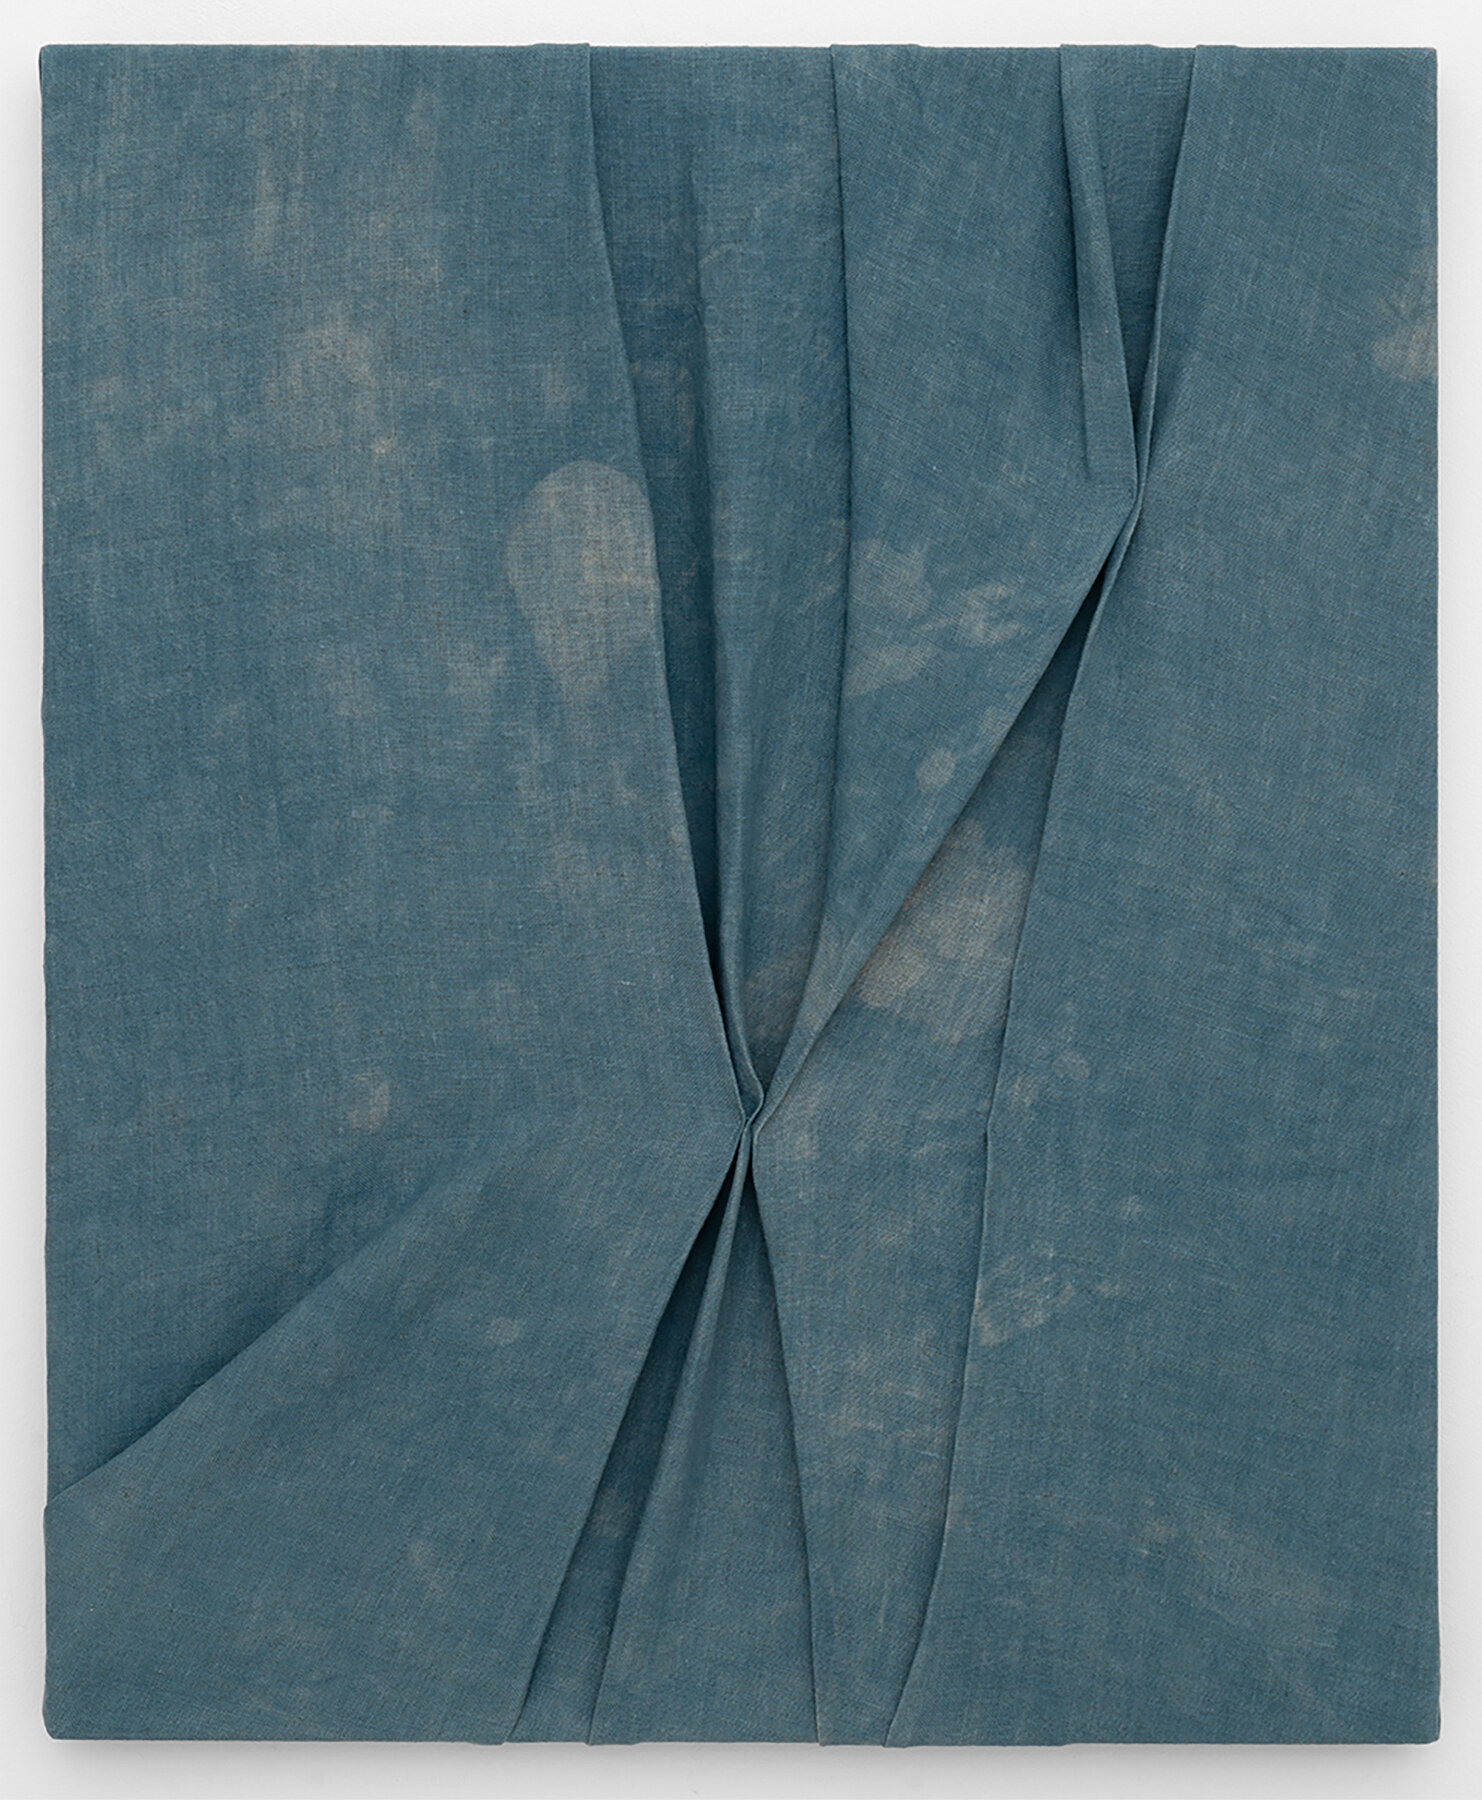   All My Blues Behind , 2021                                                                                               Indigo dyed linen, stitched                                                                                                    